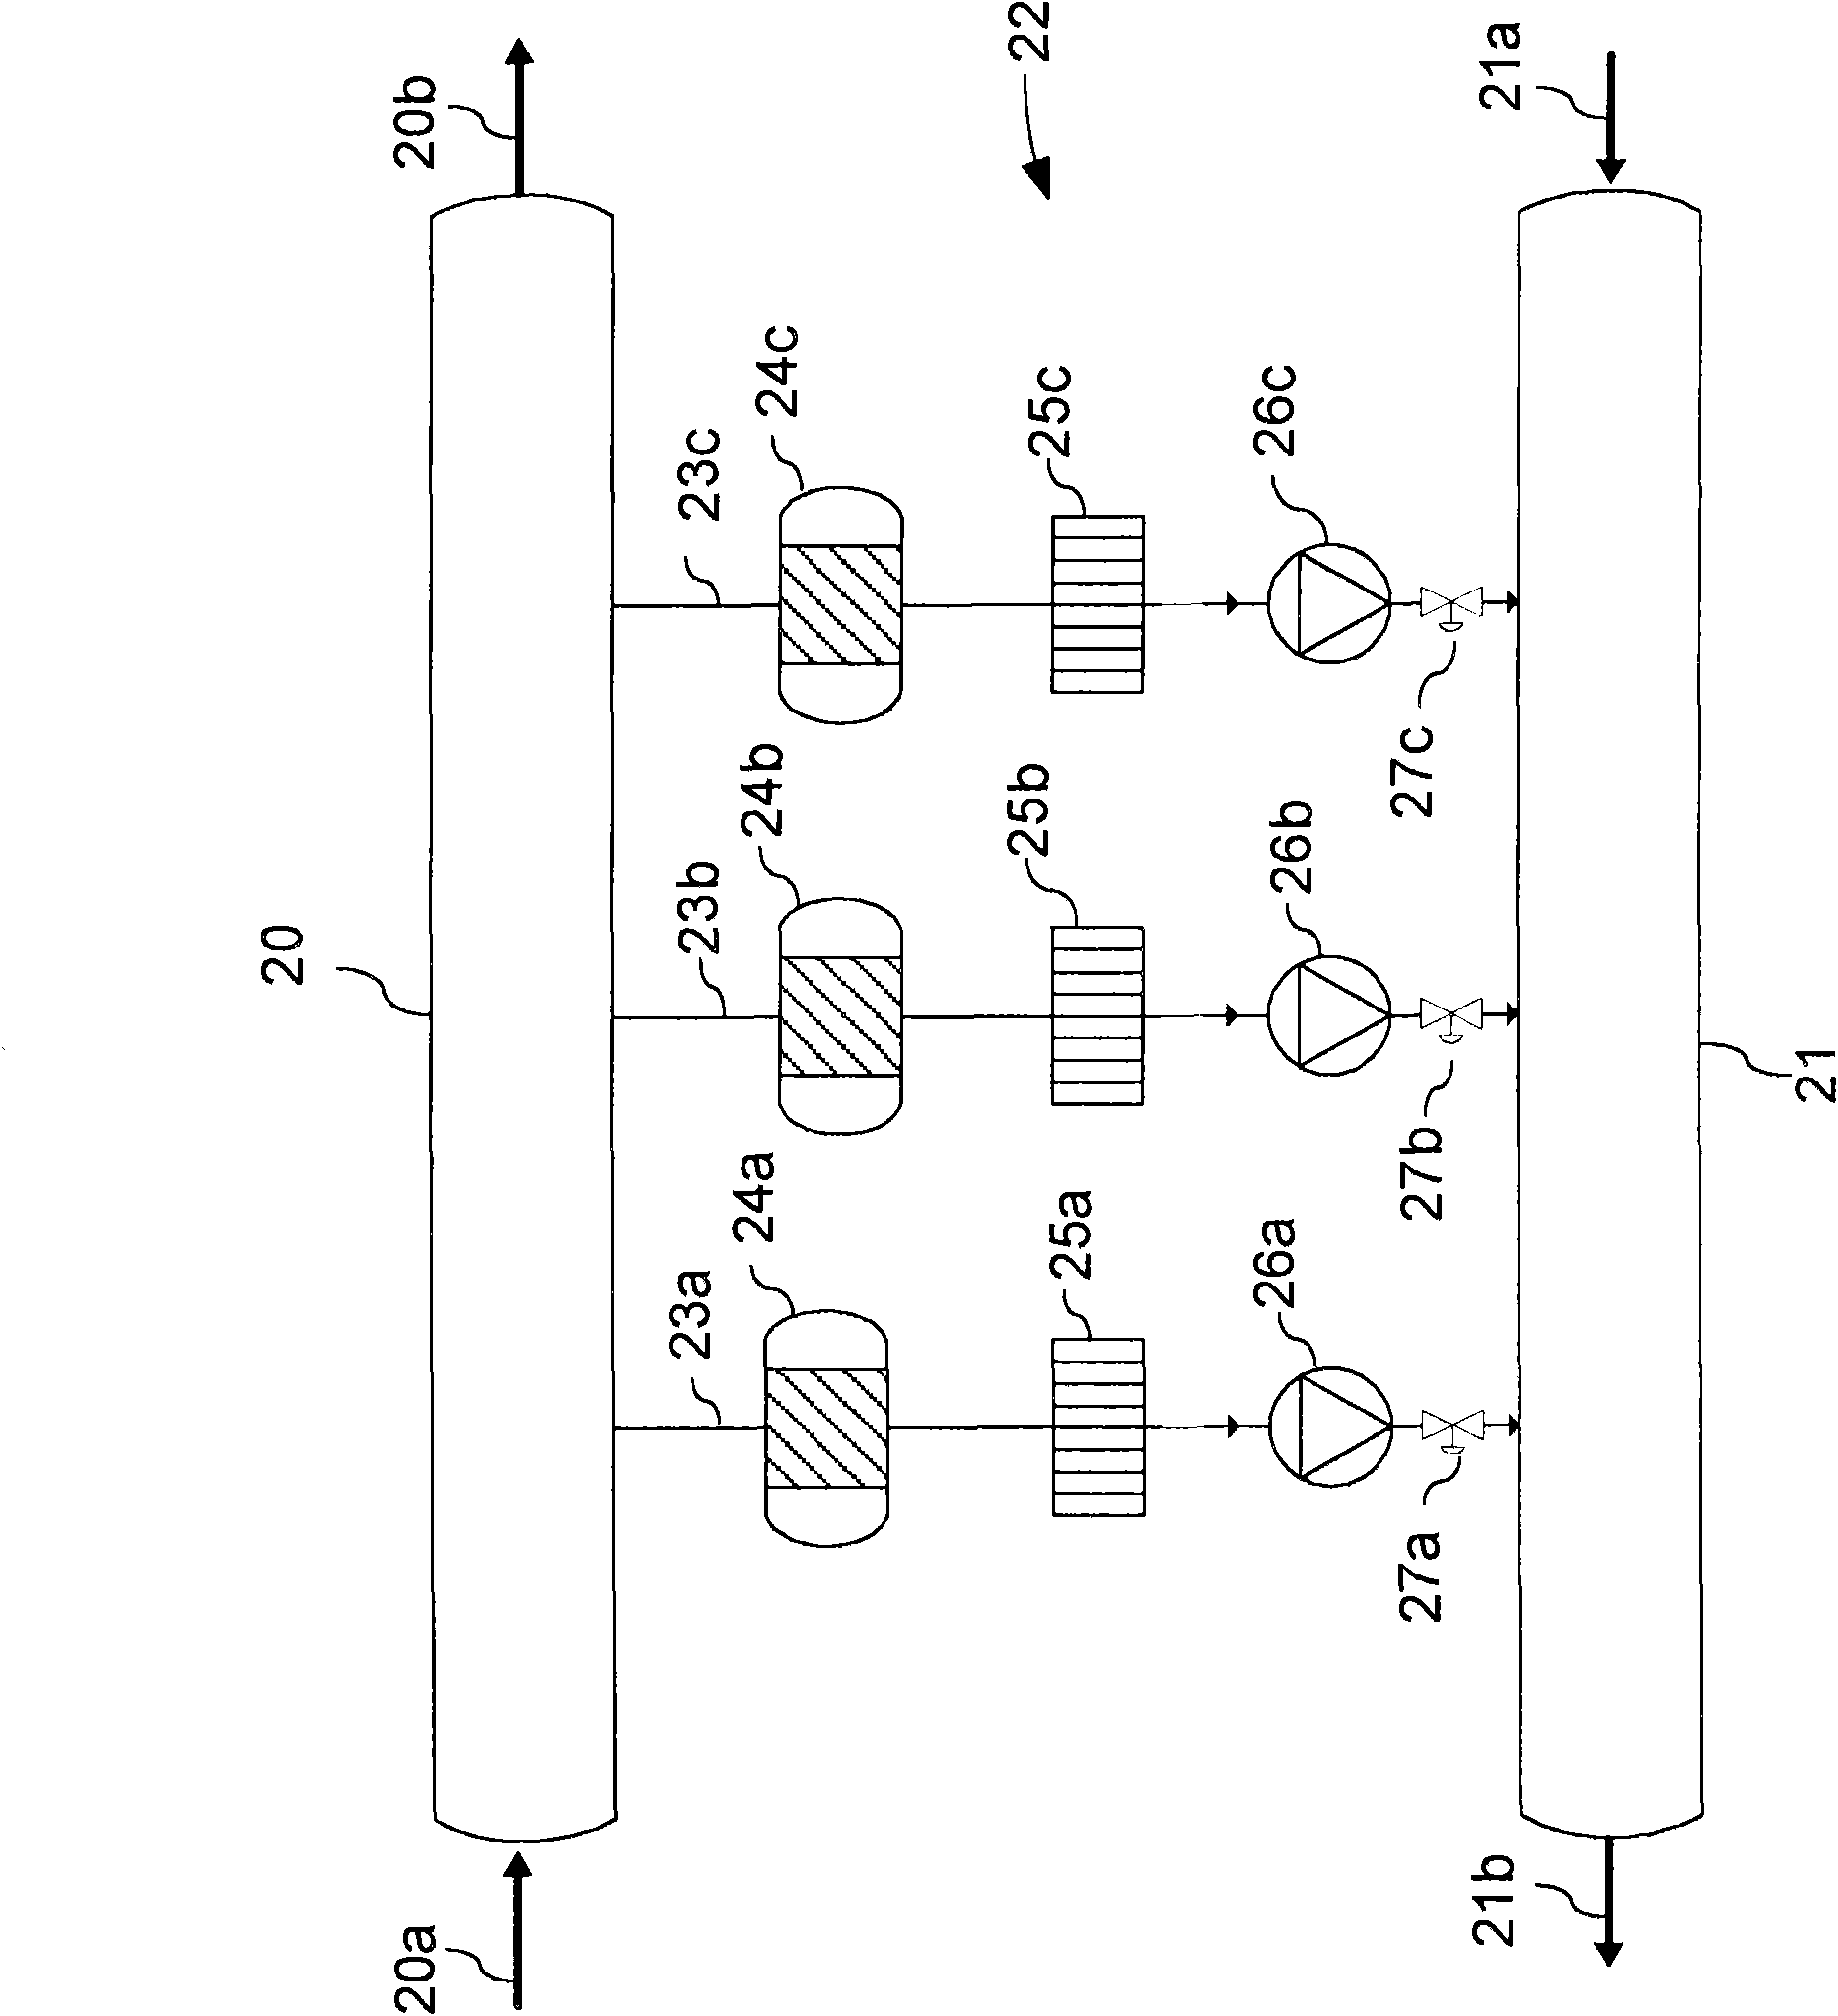 Large two-stroke diesel engine with exhaust gas recirculation control system